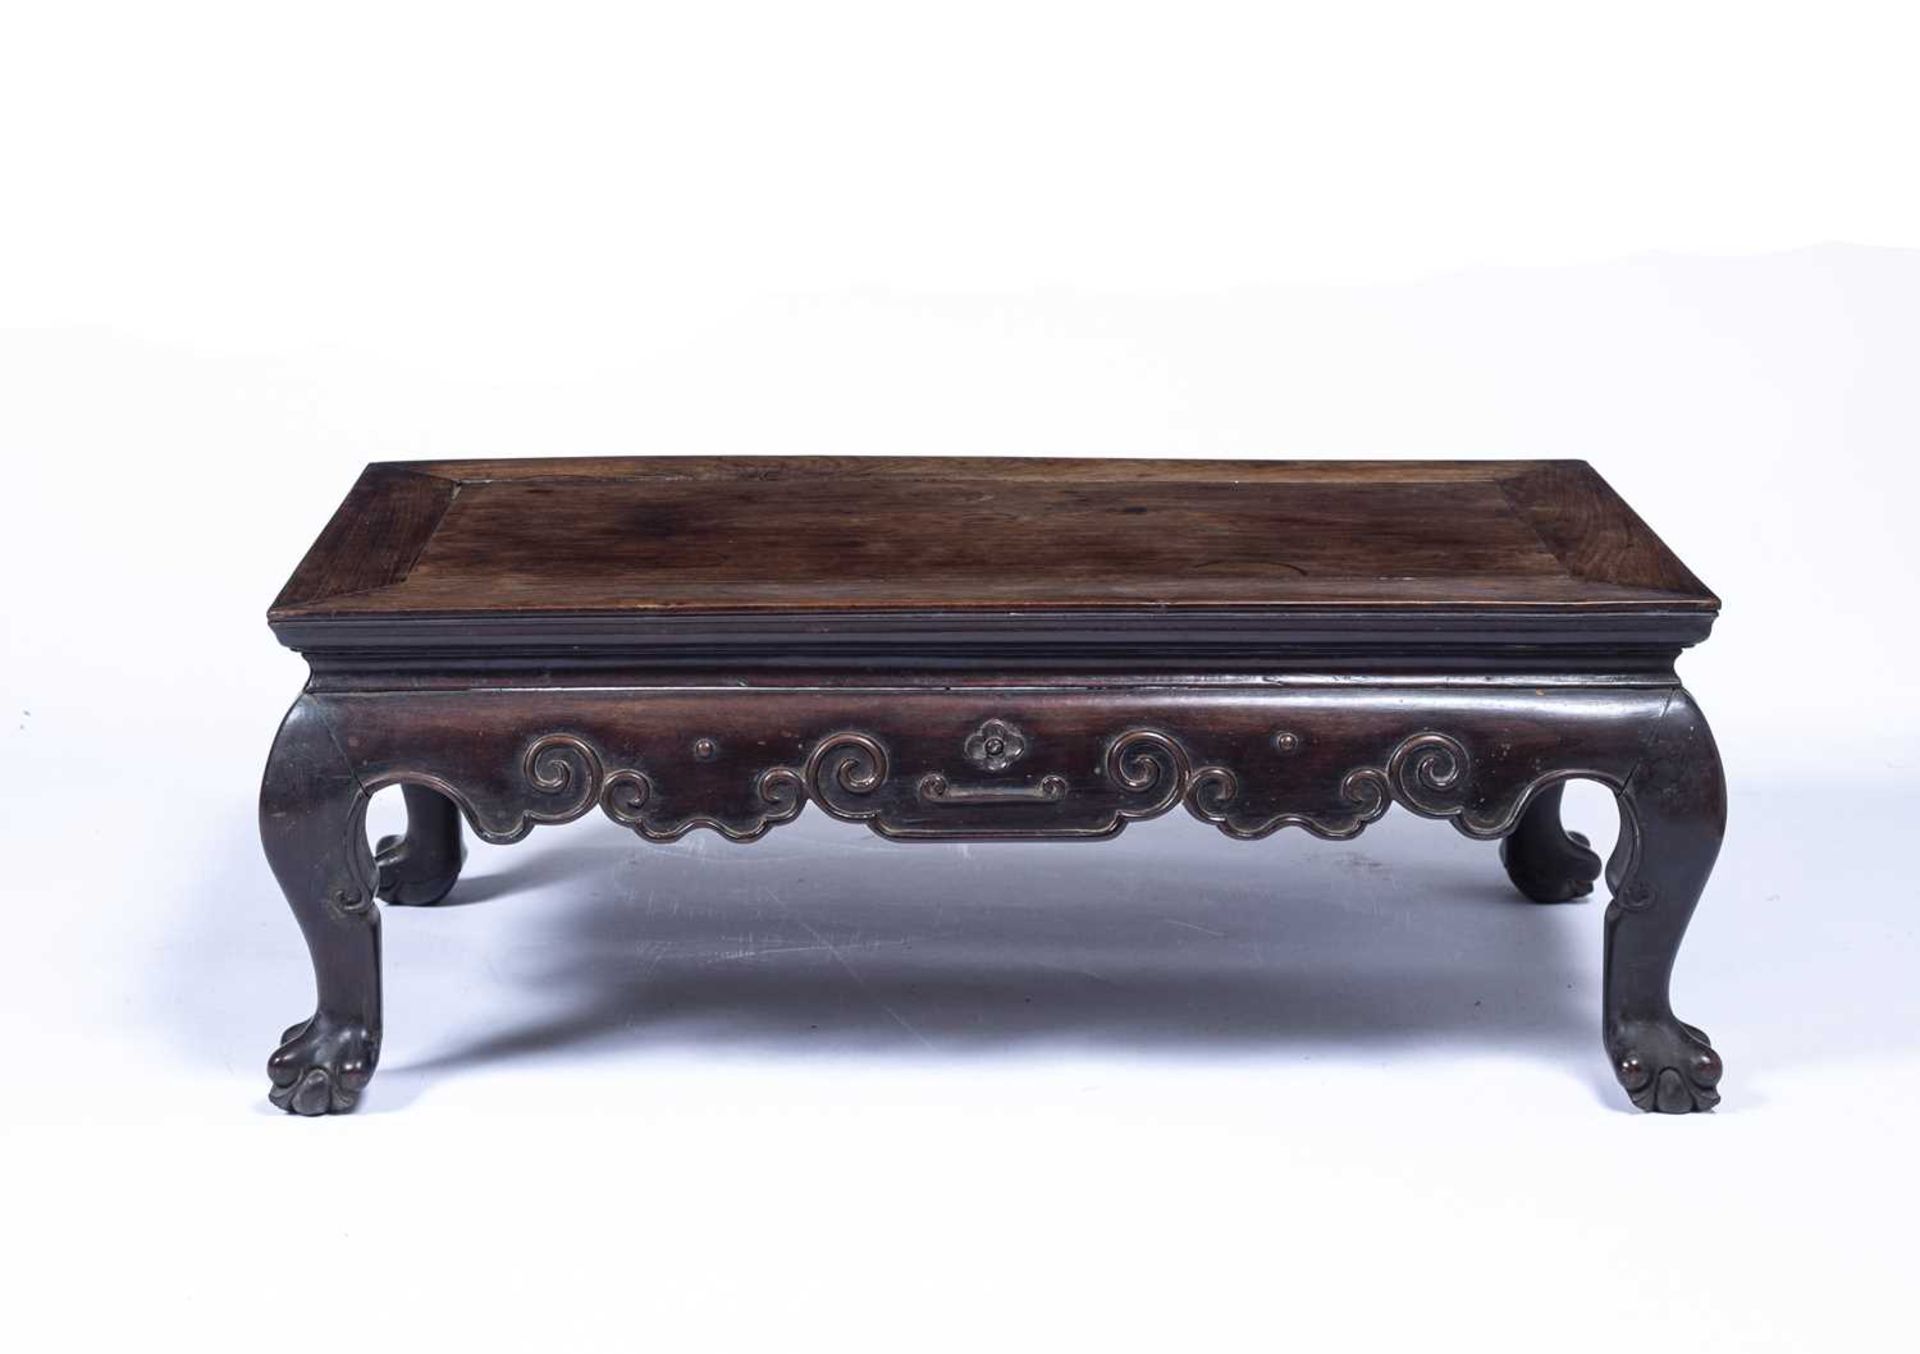 Hardwood carved 'Kang' table Chinese, with a carved under tier with cloud-shaped motifs, 76cm across - Image 4 of 5